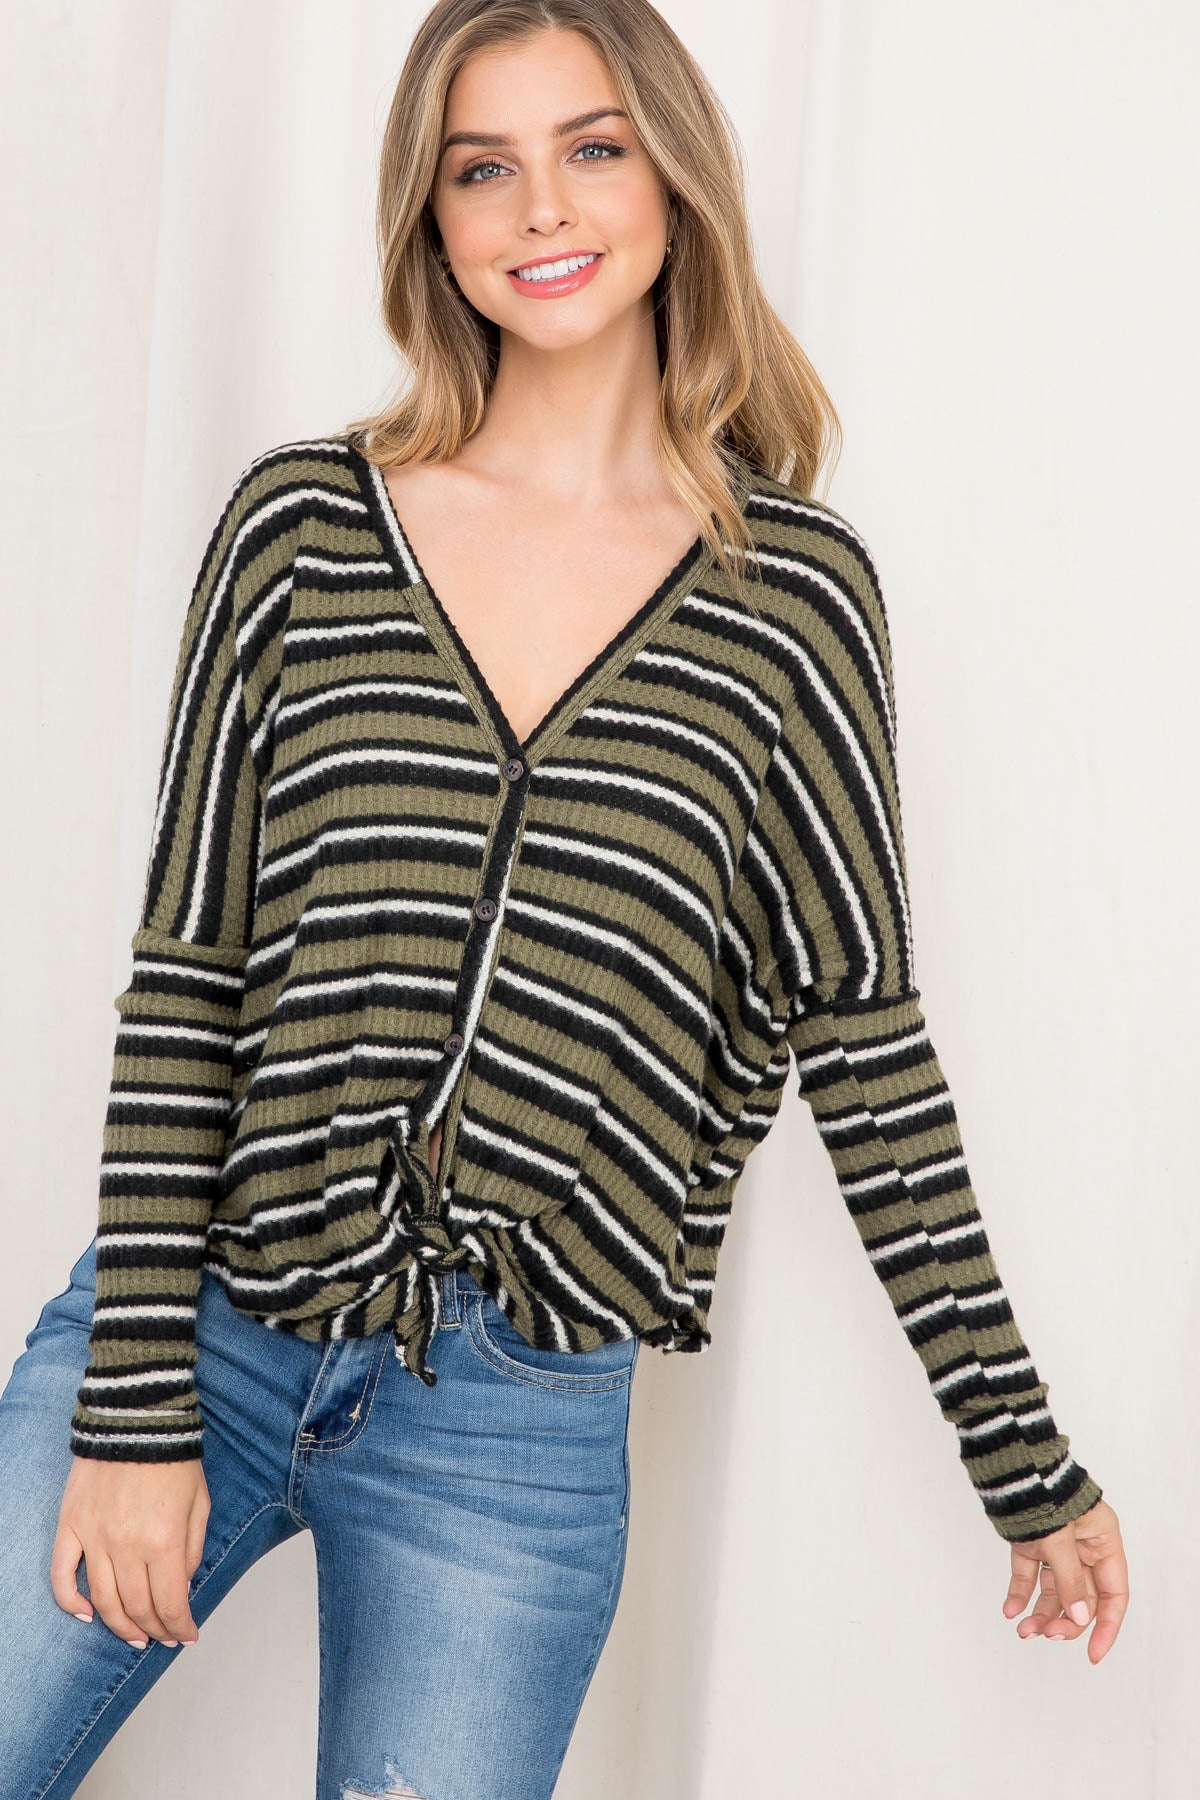 OLIVE BLACK STRIPES TOP (NOW $3.00 ONLY!)